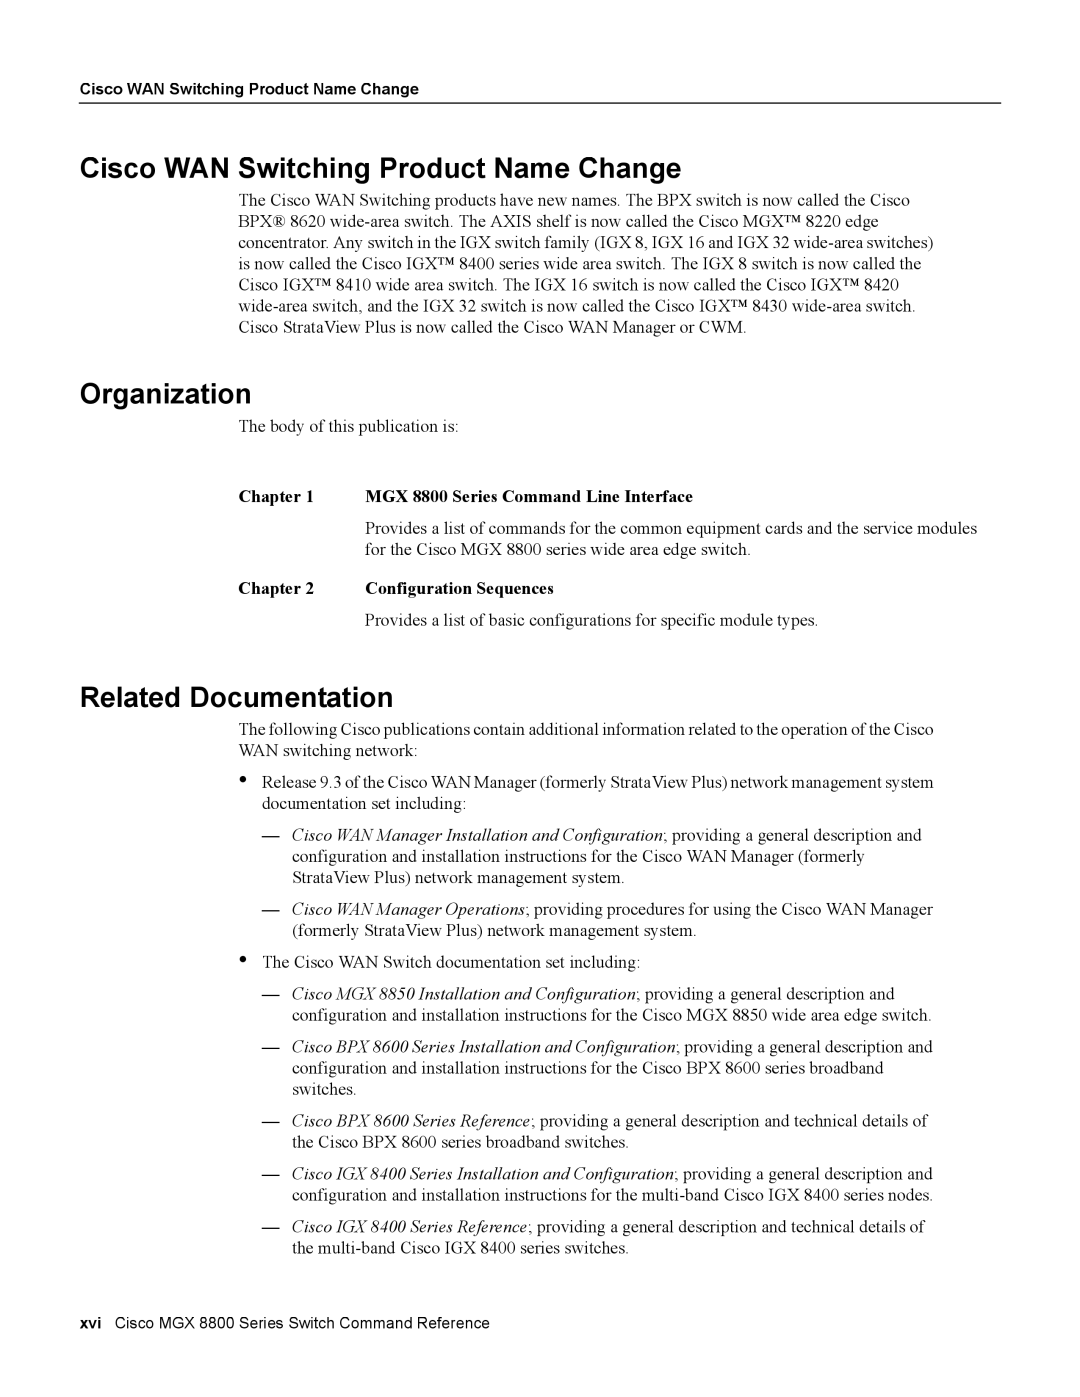 Cisco Systems MGXTM 8800 manual Cisco WAN Switching Product Name Change, Organization, Related Documentation 